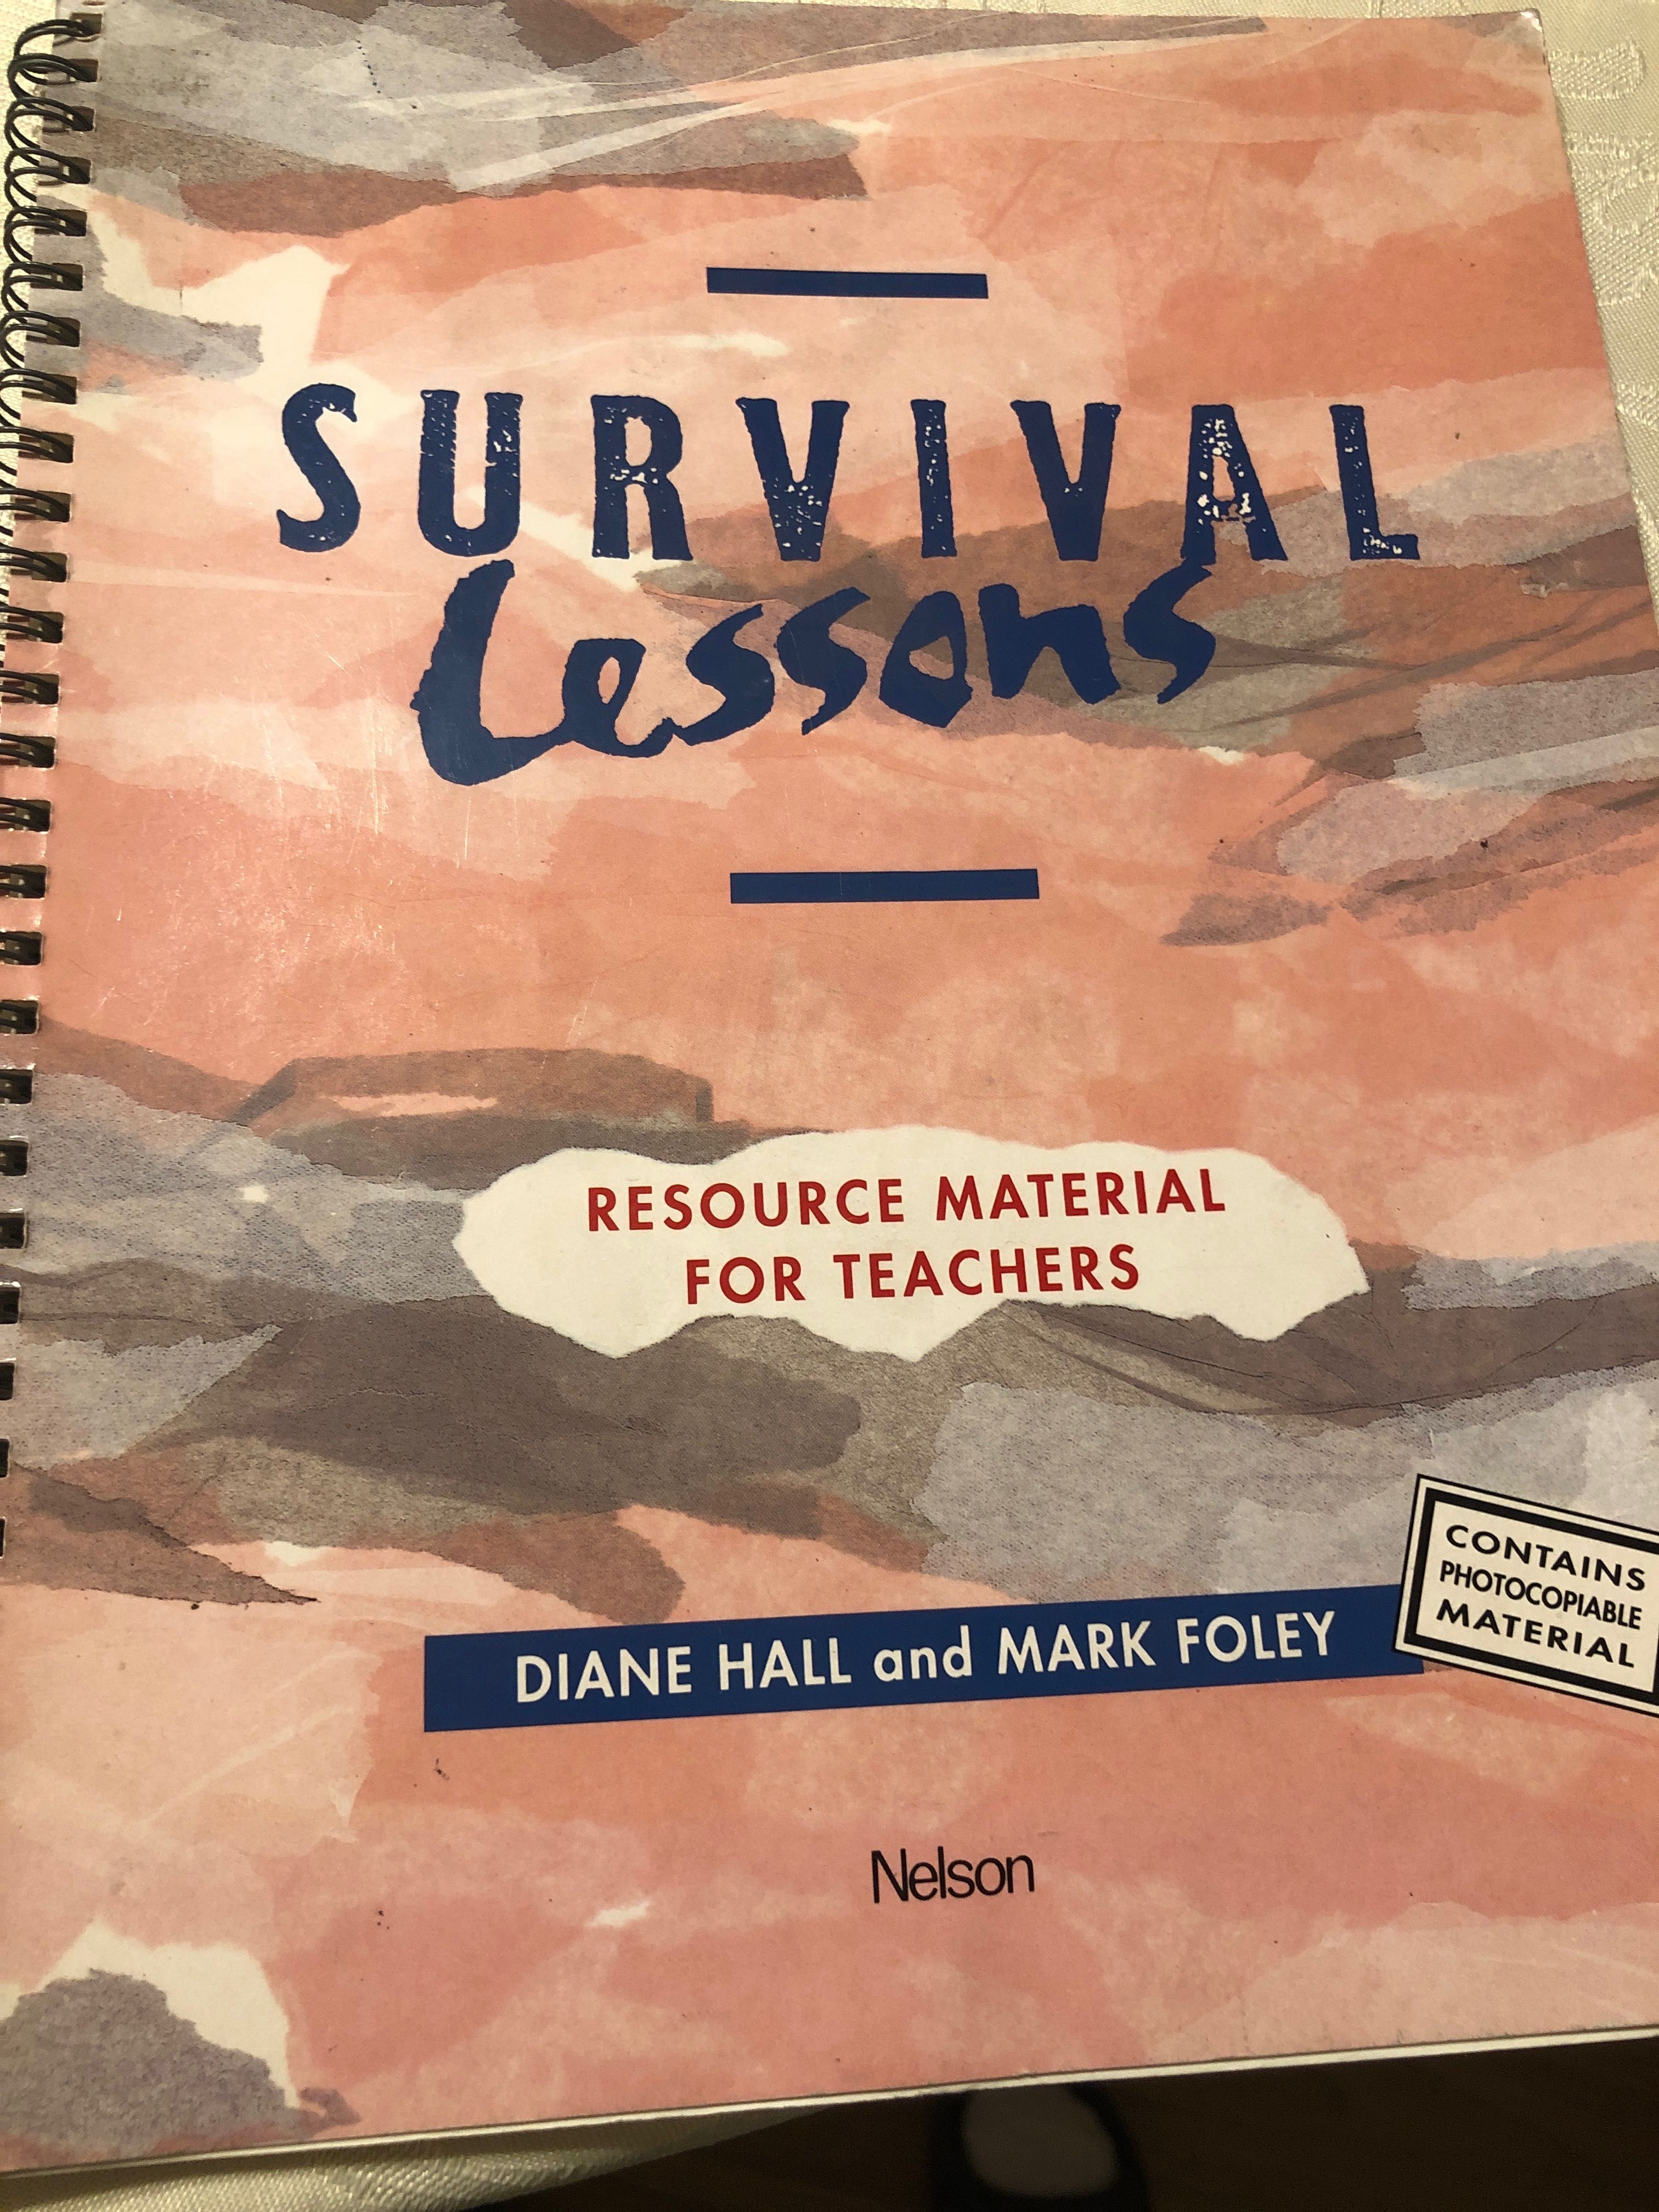 Survival Lessons. Resource Materiał for Teachers